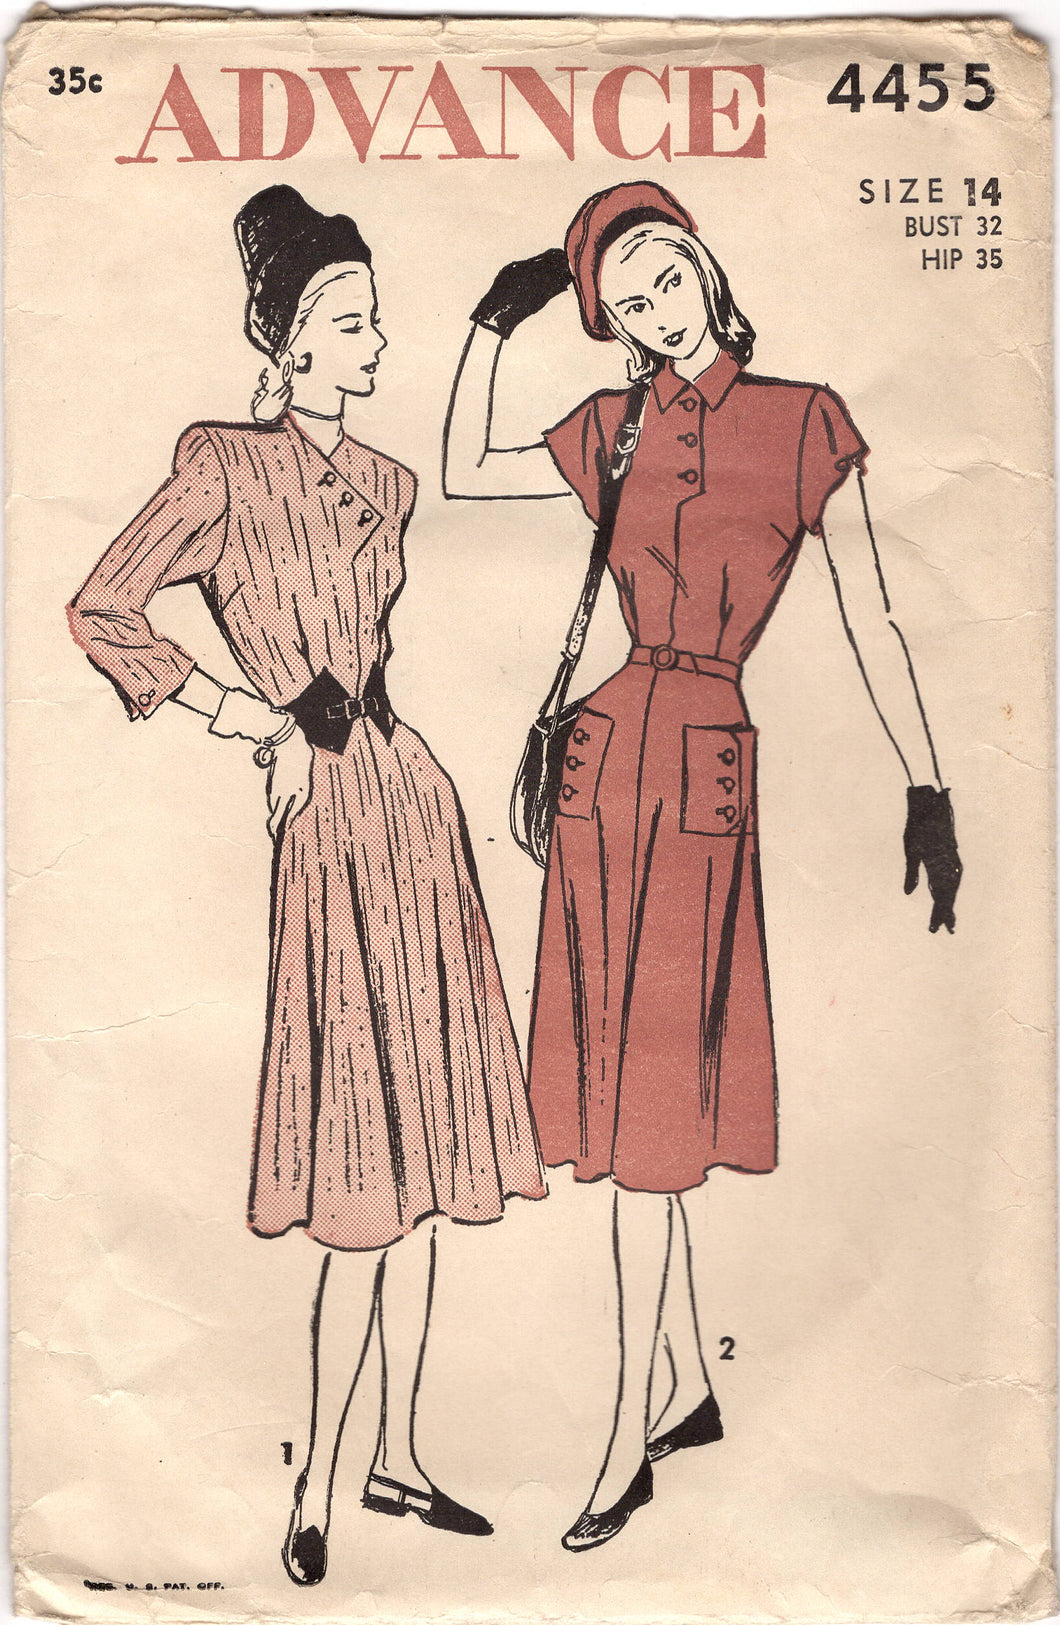 1940's Advance Fit and Flare Dress with Button accent on Bodice and Pocket and Belt Pattern - Bust 32